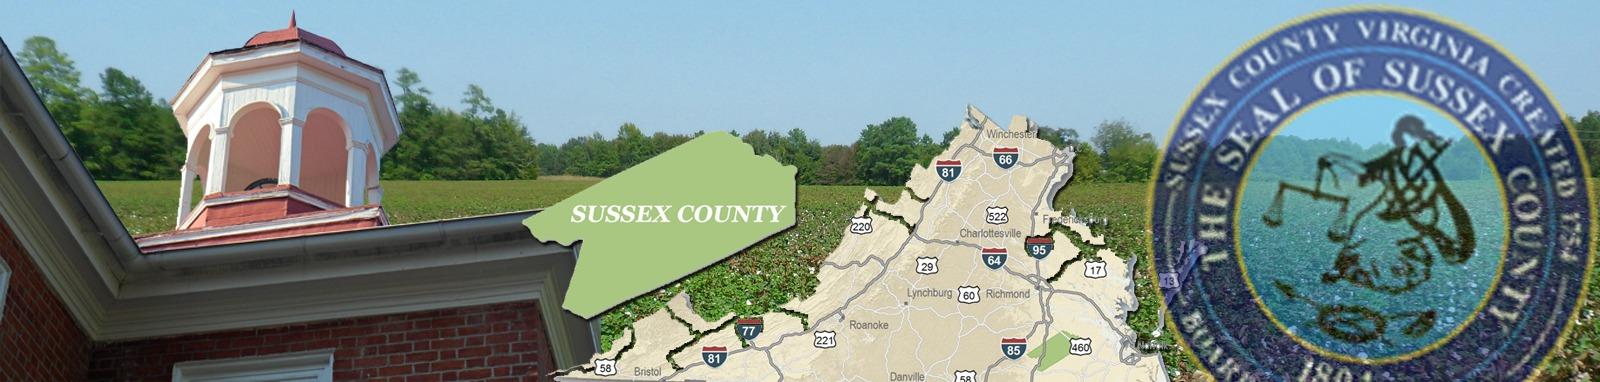 About Sussex County Cover